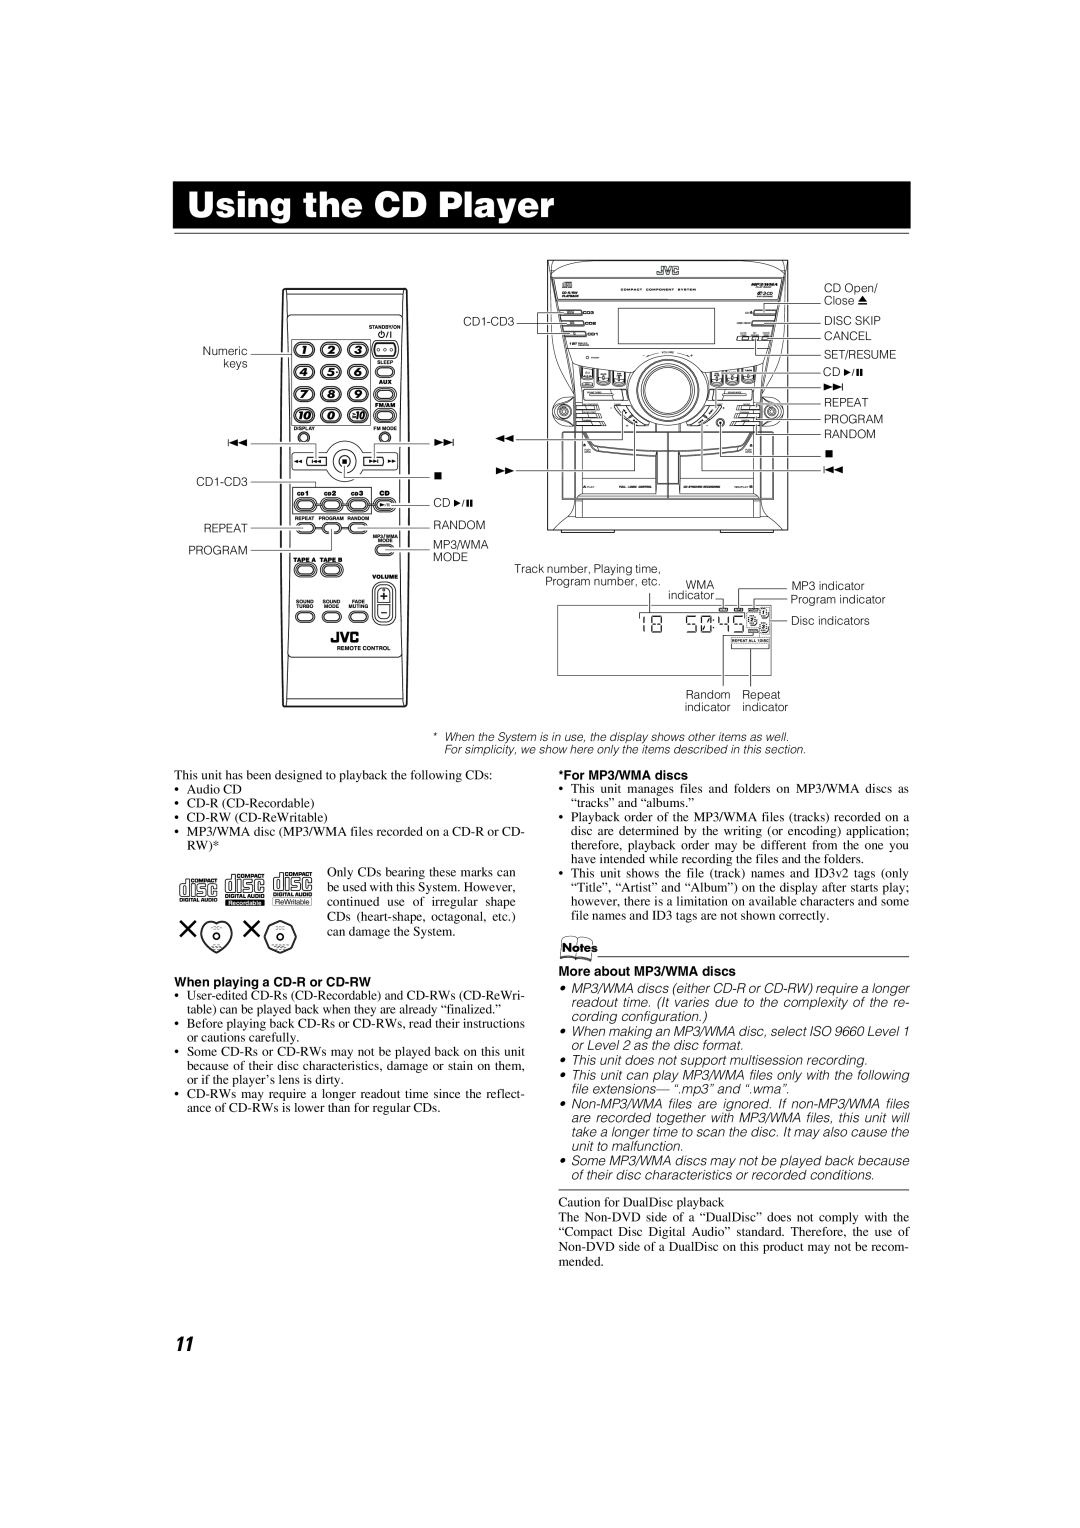 JVC MX-KC45 manual Using the CD Player, When playing a CD-Ror CD-RW, For MP3/WMA discs, More about MP3/WMA discs 